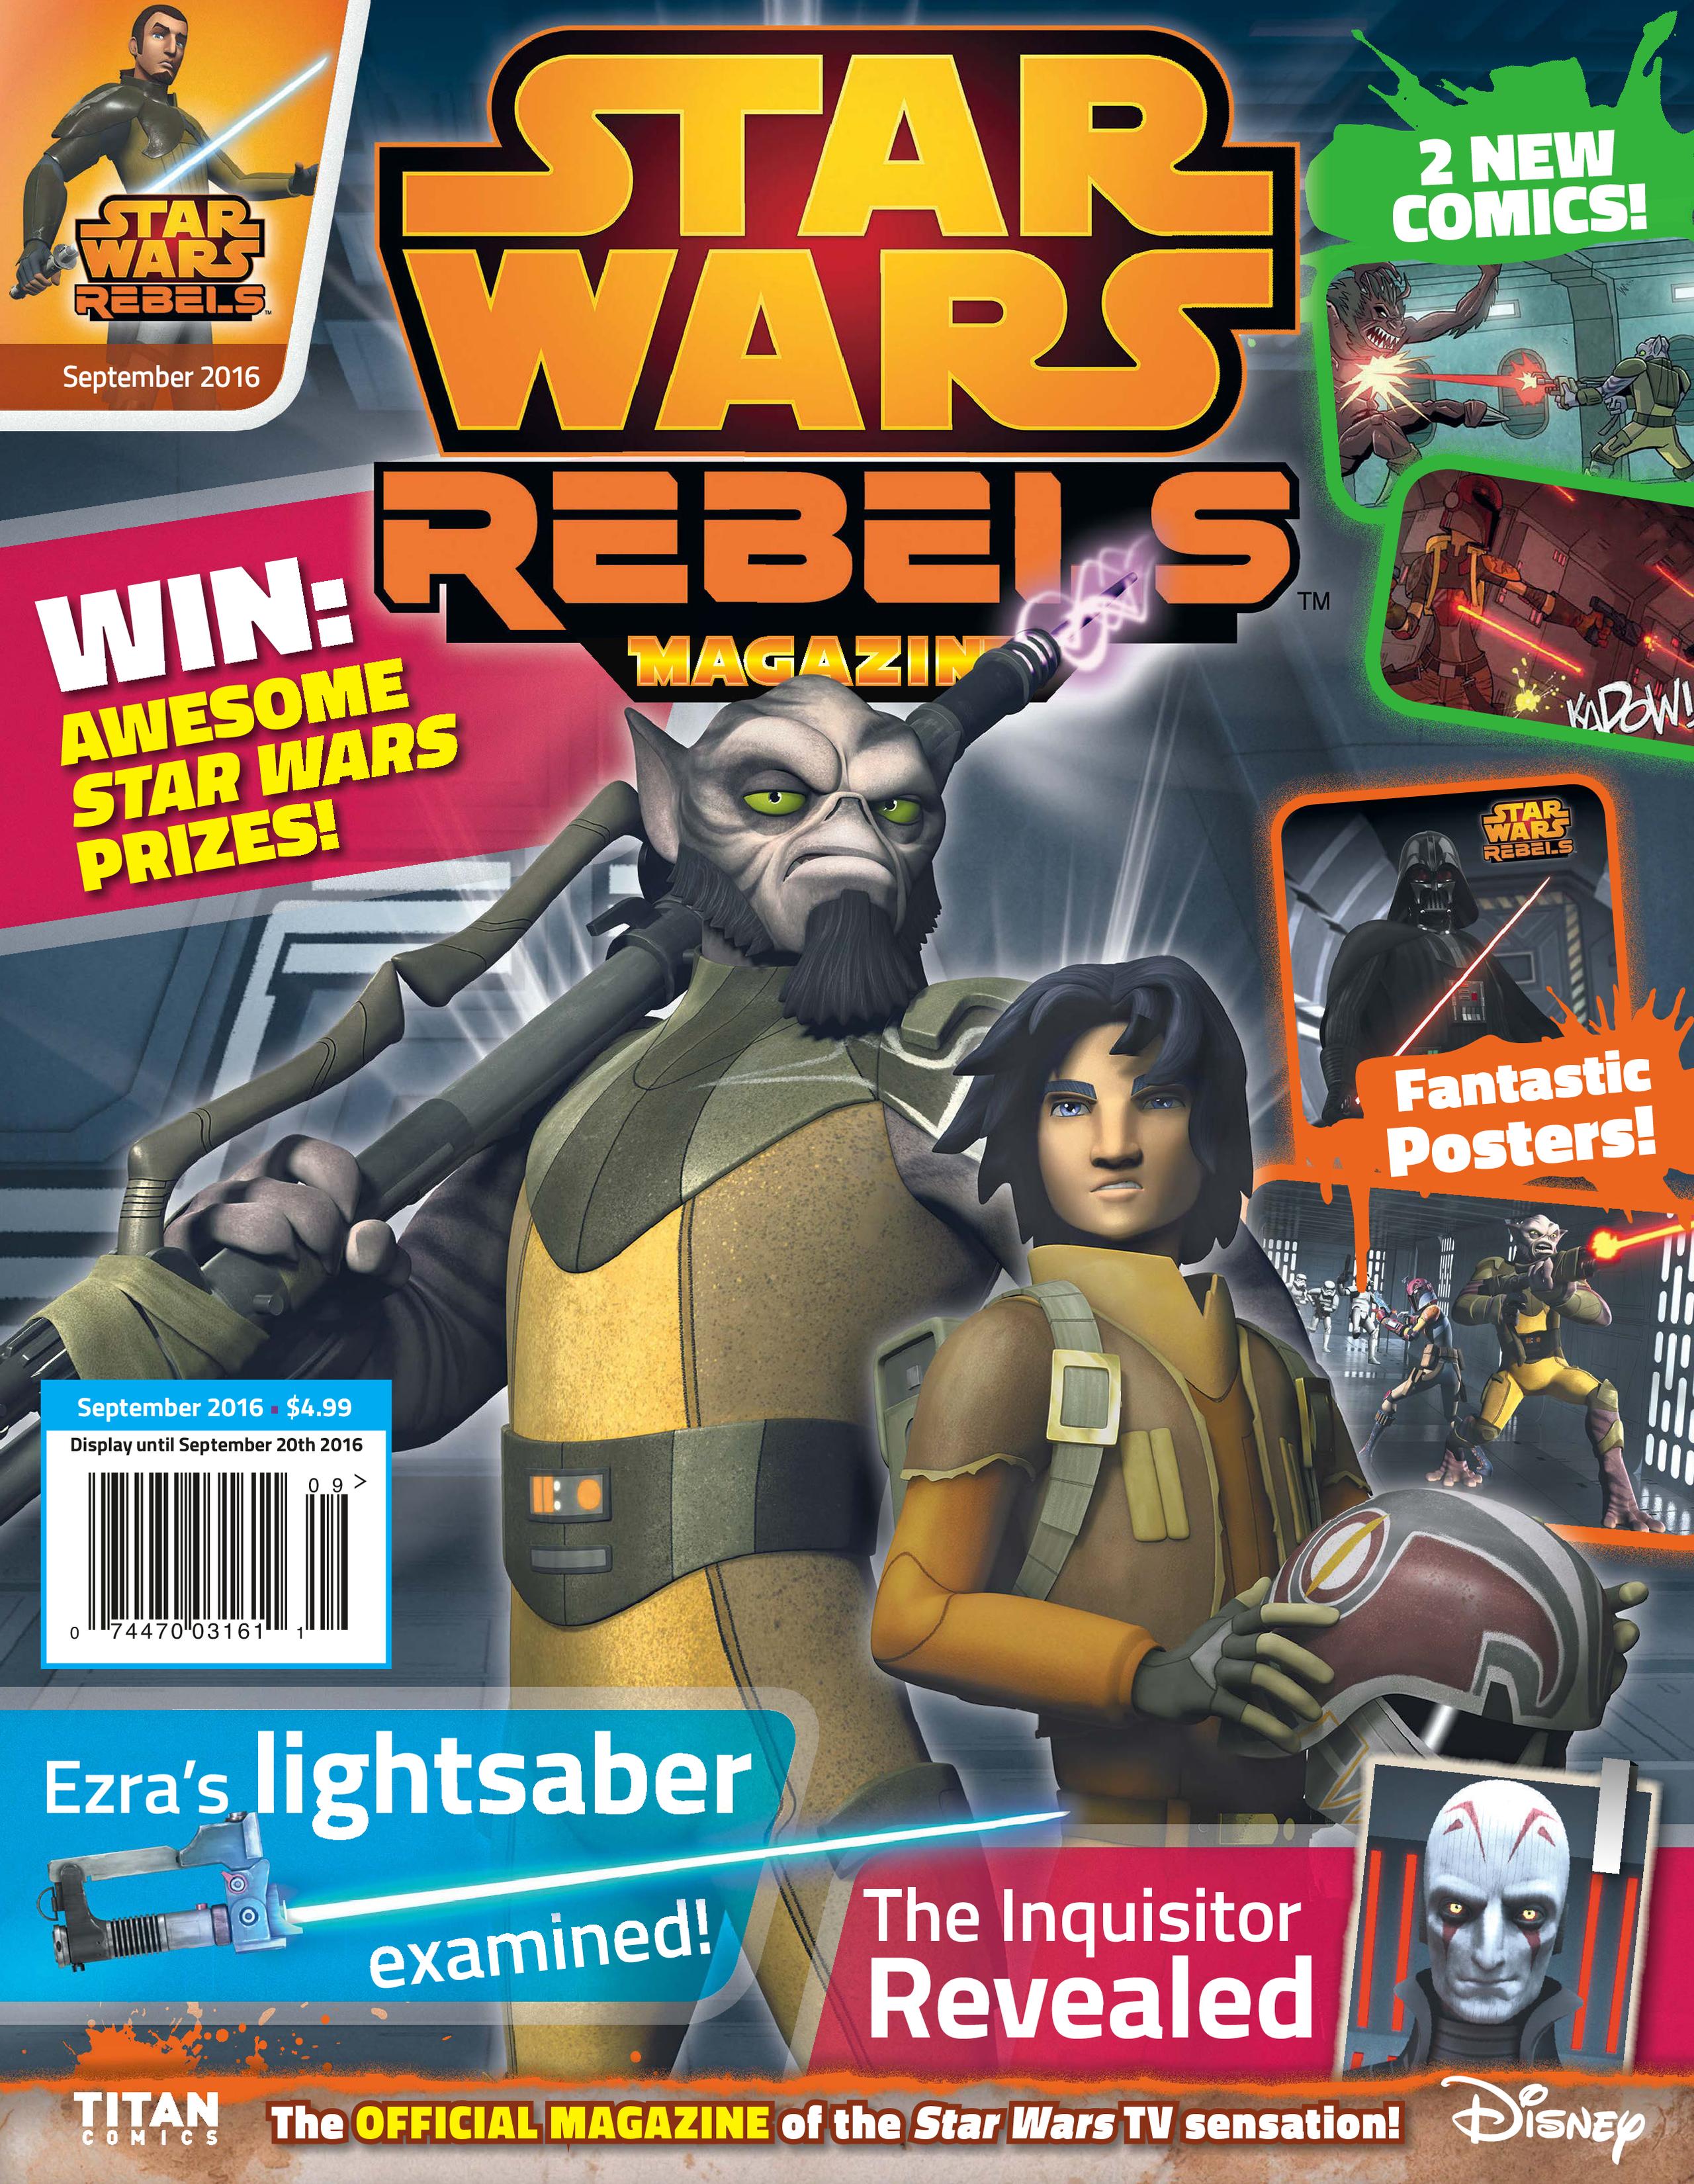 2560px x 3300px - Star Wars Rebels Magazine Issue 6 | Read Star Wars Rebels Magazine Issue 6  comic online in high quality. Read Full Comic online for free - Read comics  online in high quality .|viewcomiconline.com